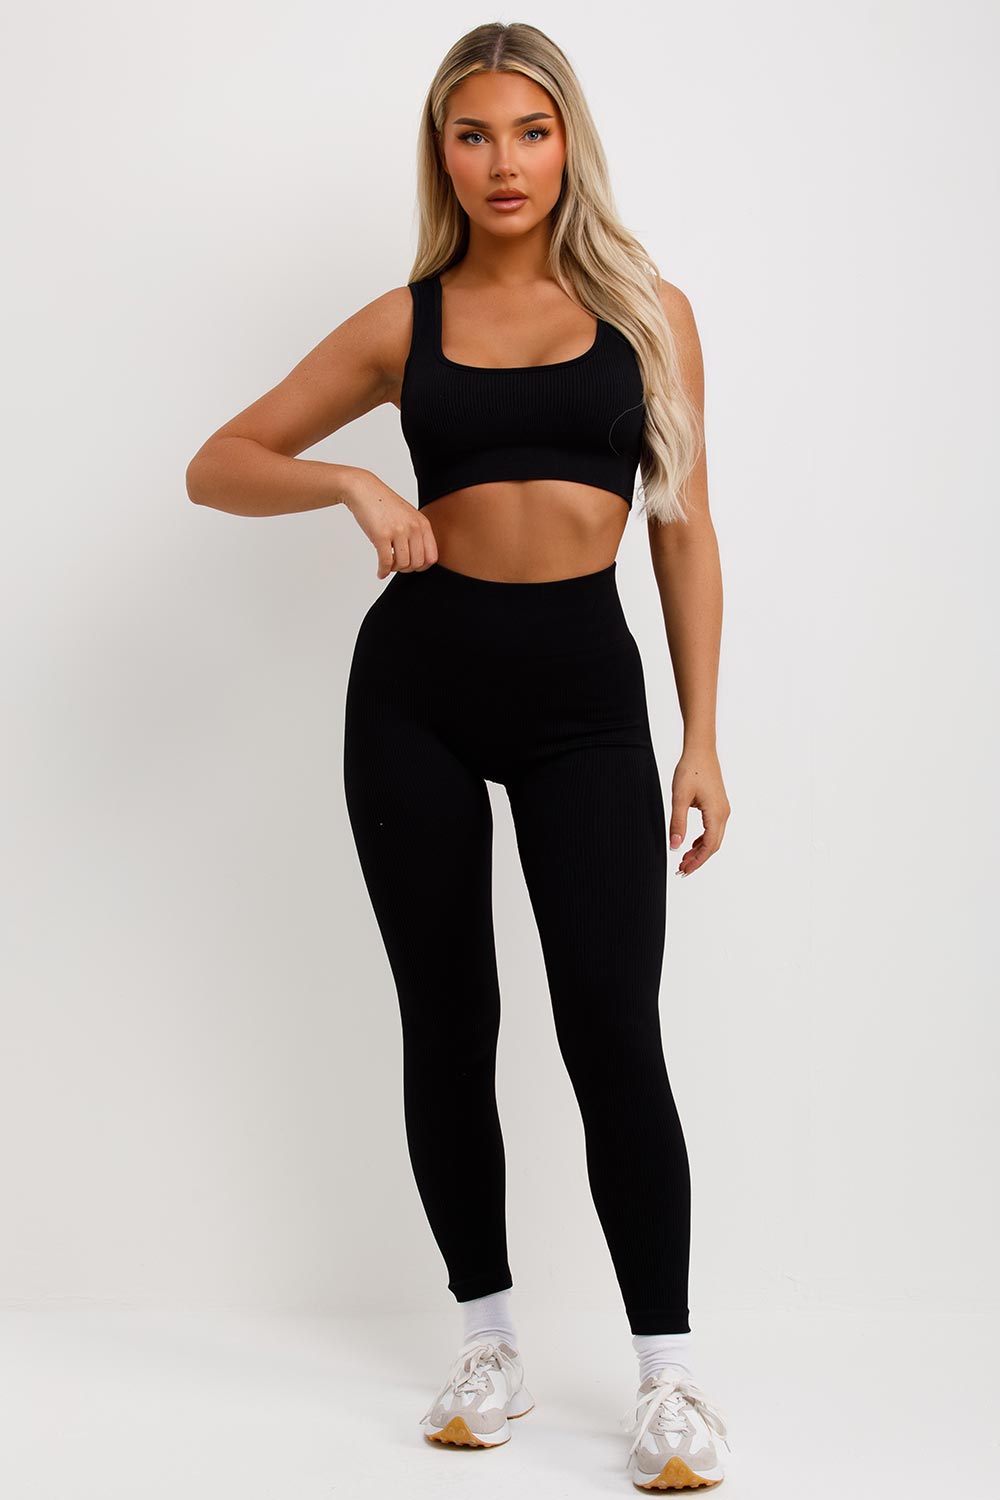 black high waist ribbed leggings and crop top co ord set